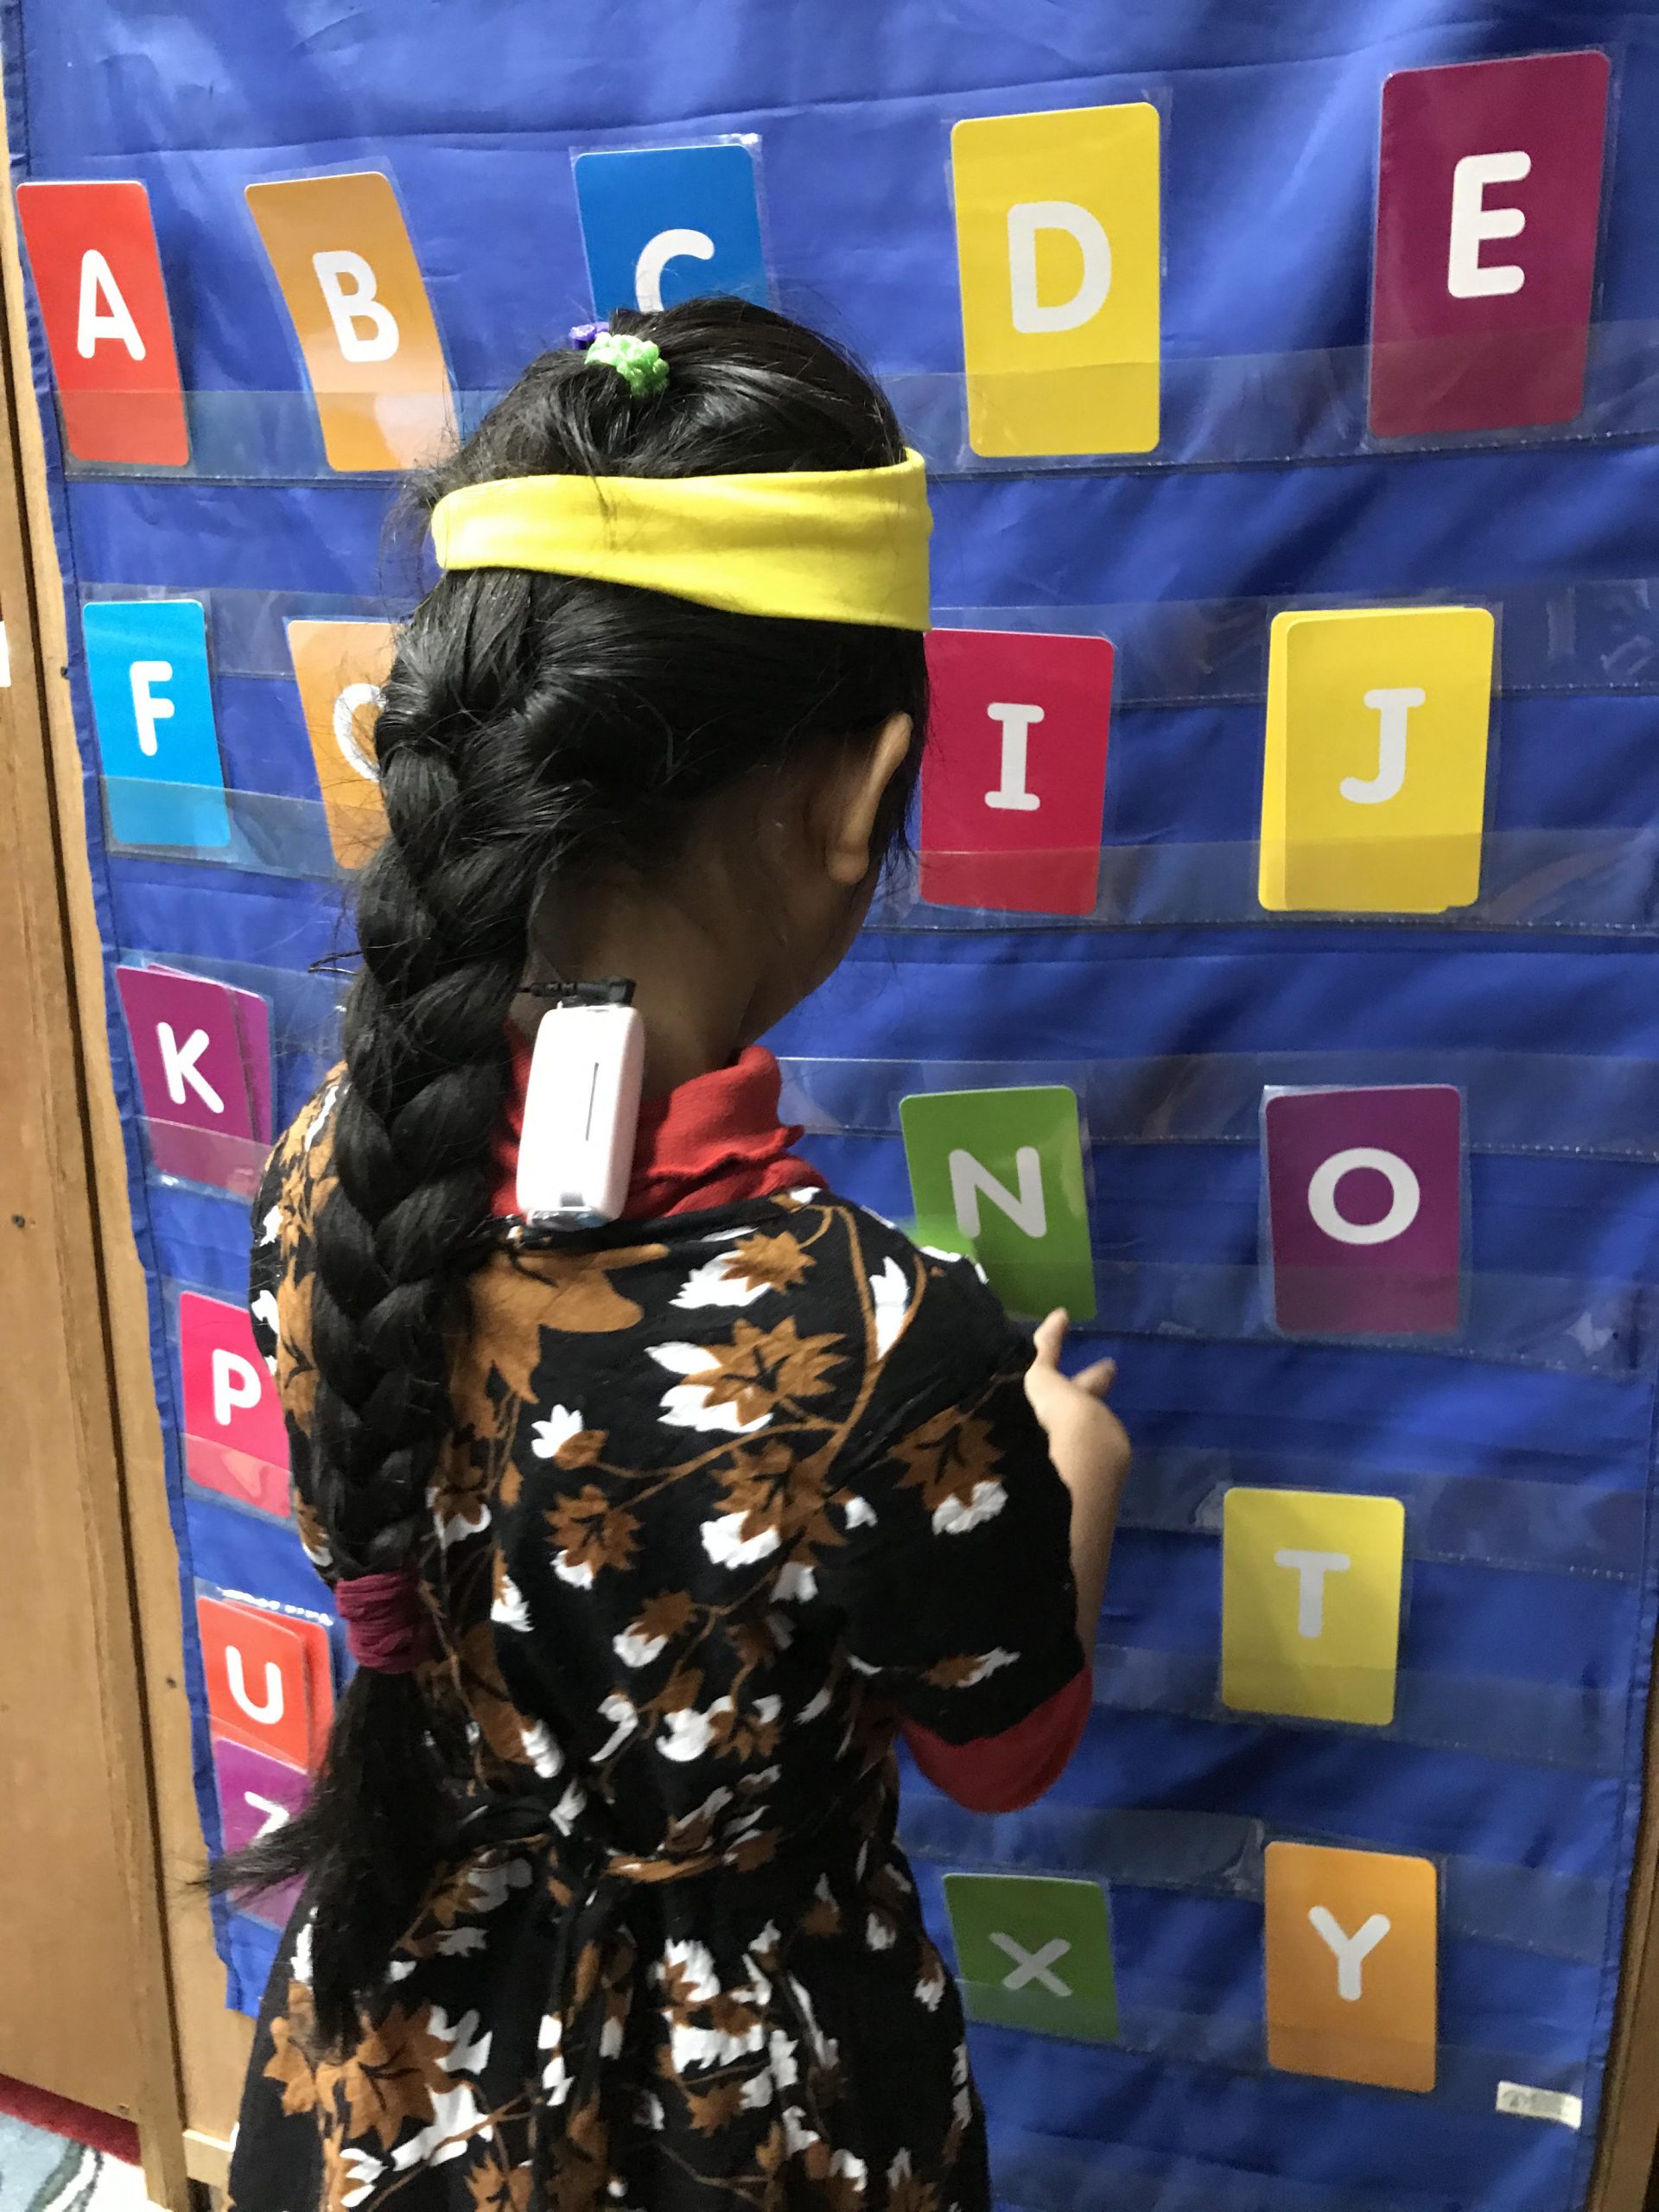 The back of an elementary school female student is shown as she stands in front of a blue pocket chart containing uppercase letters of the alphabet. She is wearing a dress and her long brown hair is in a braid. She wears a yellow headband and her speech processor is clipped to her shirt.